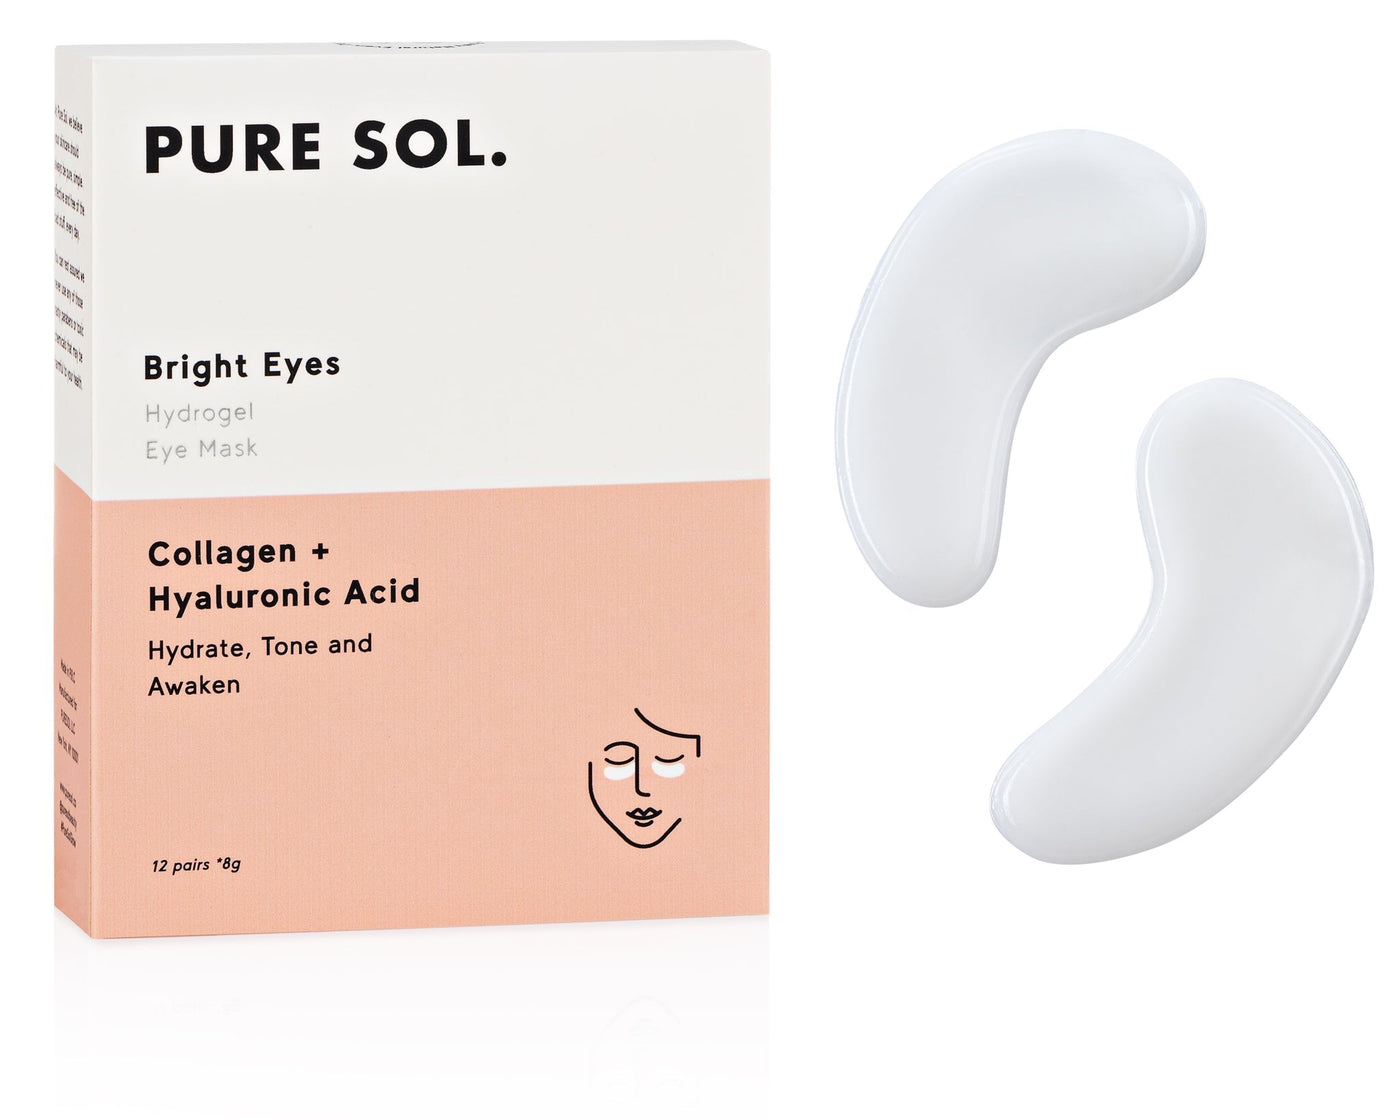 Bright Eyes - Hydrogel Eye Patch Collagen & Hyaluronic Acid By PURE SOL.